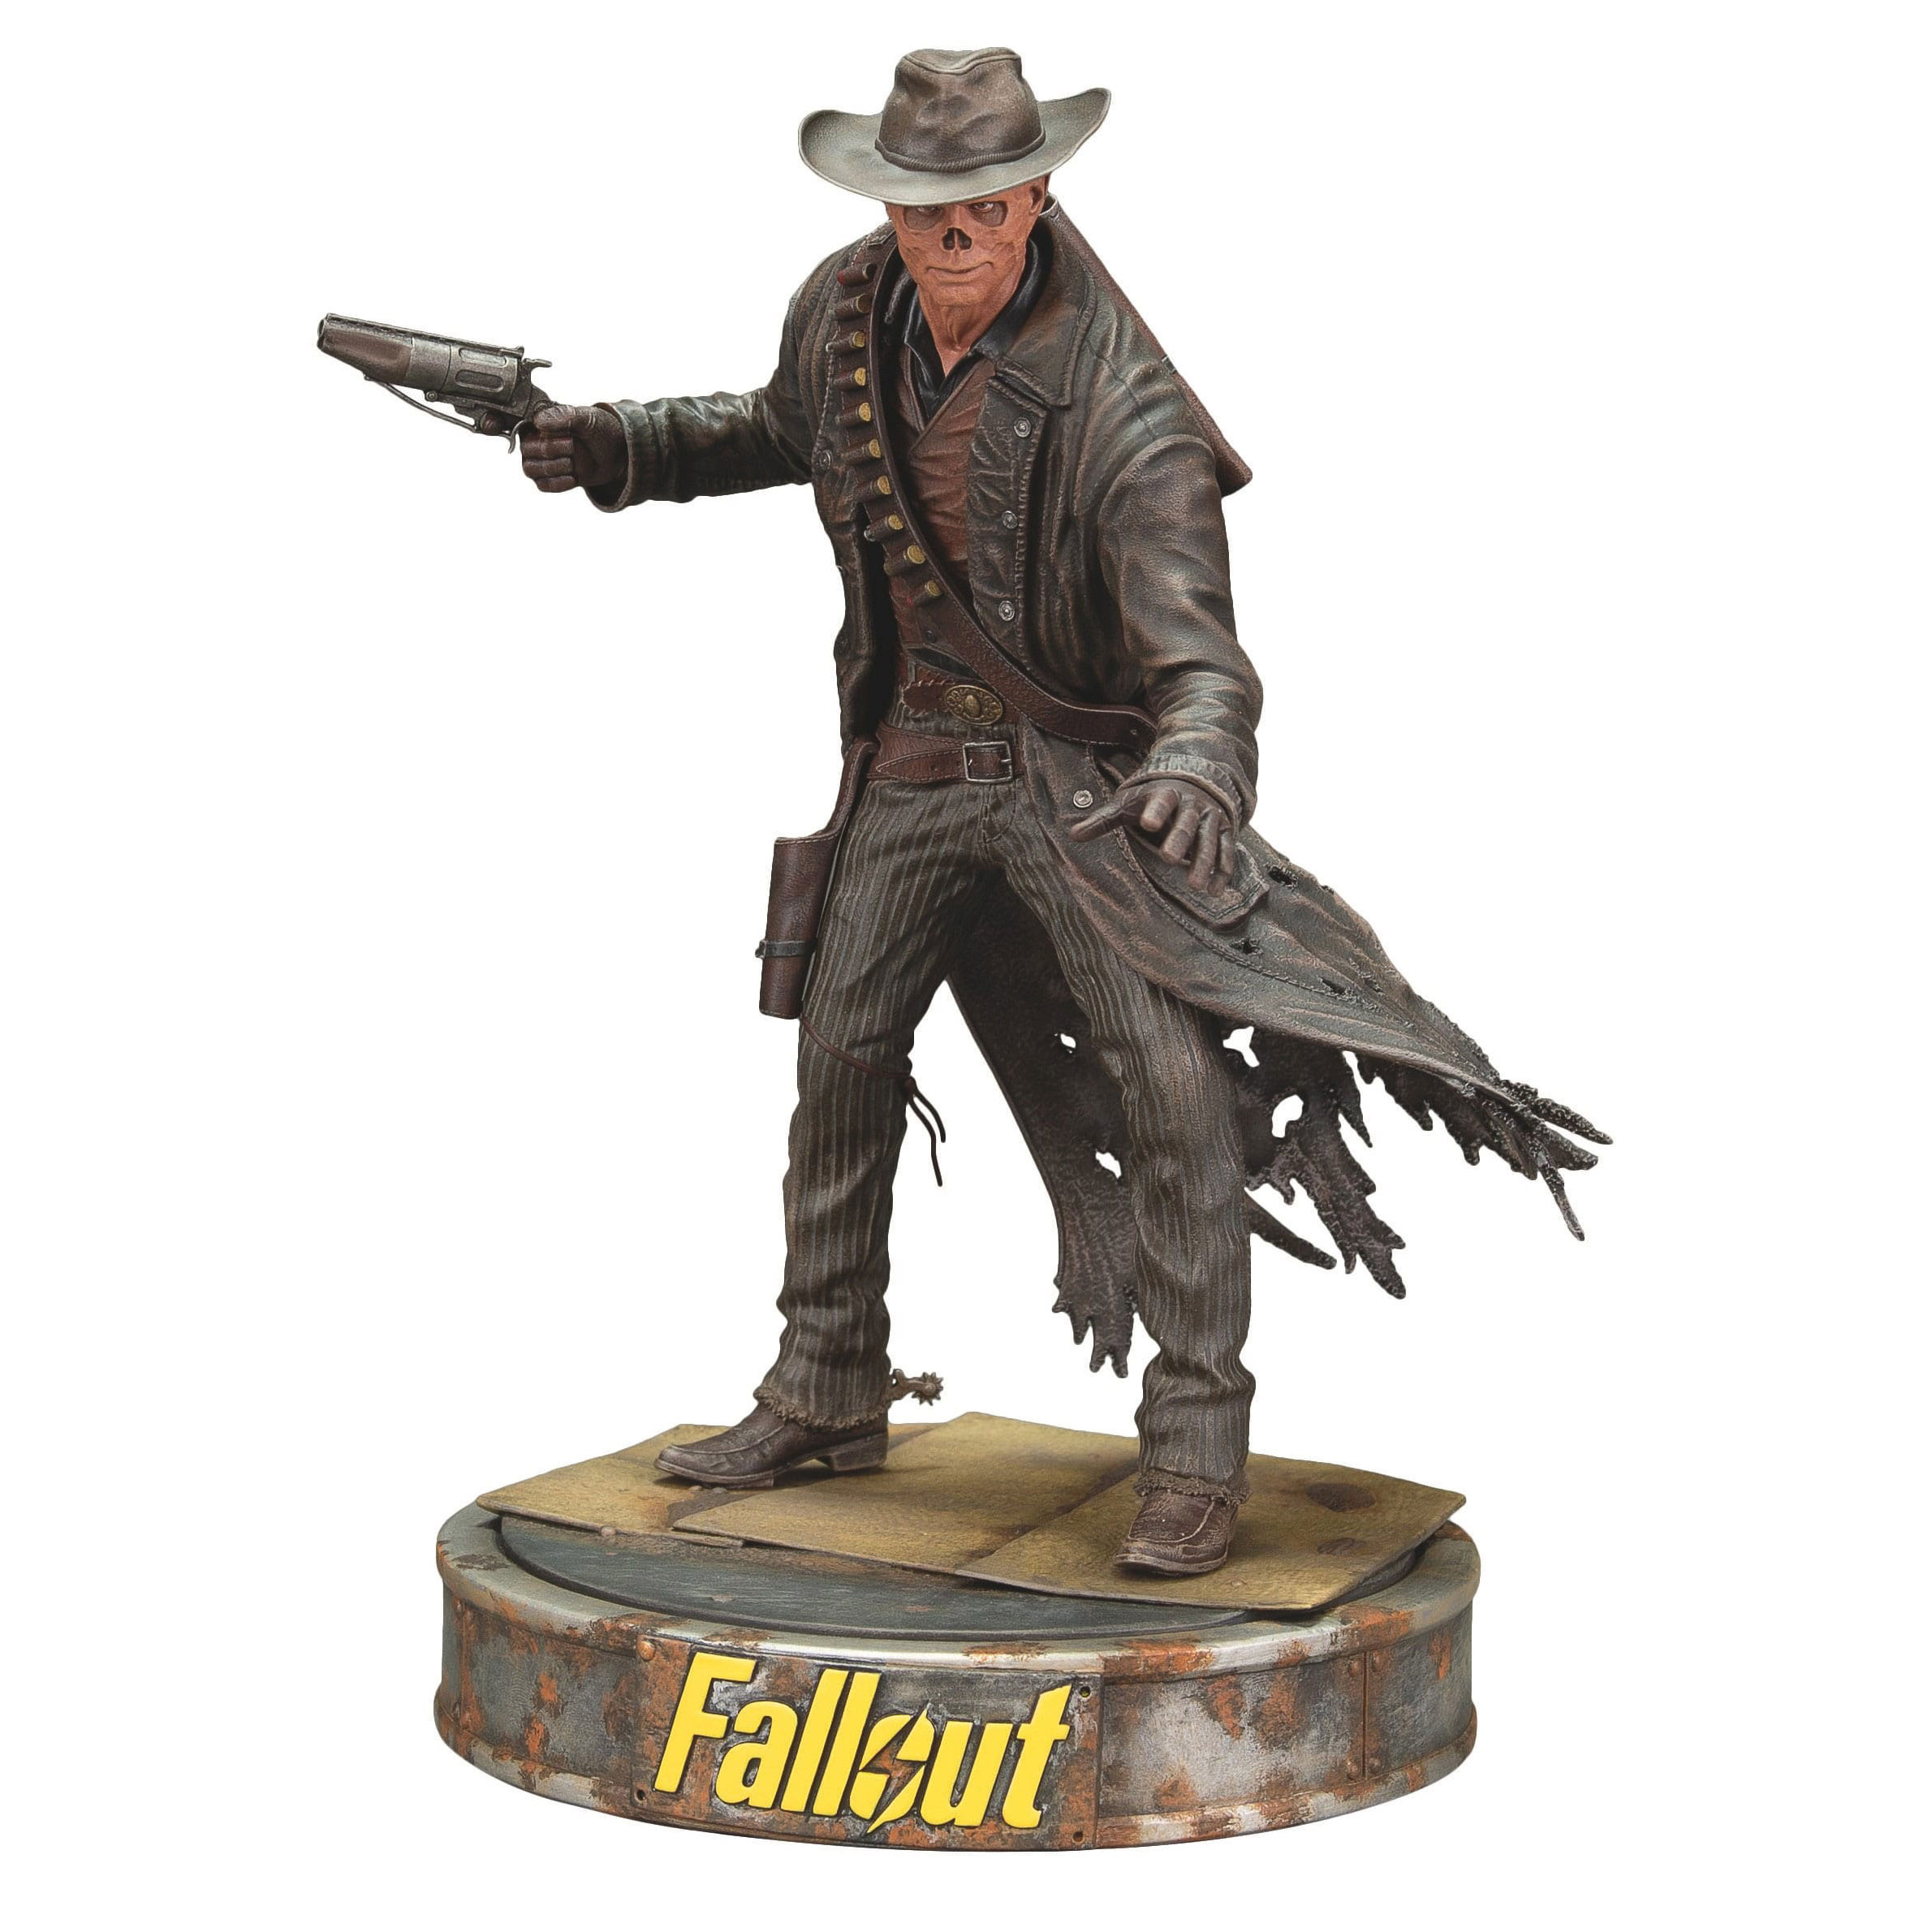 Fallout Serie: The Ghoul Statue (PreORDER]